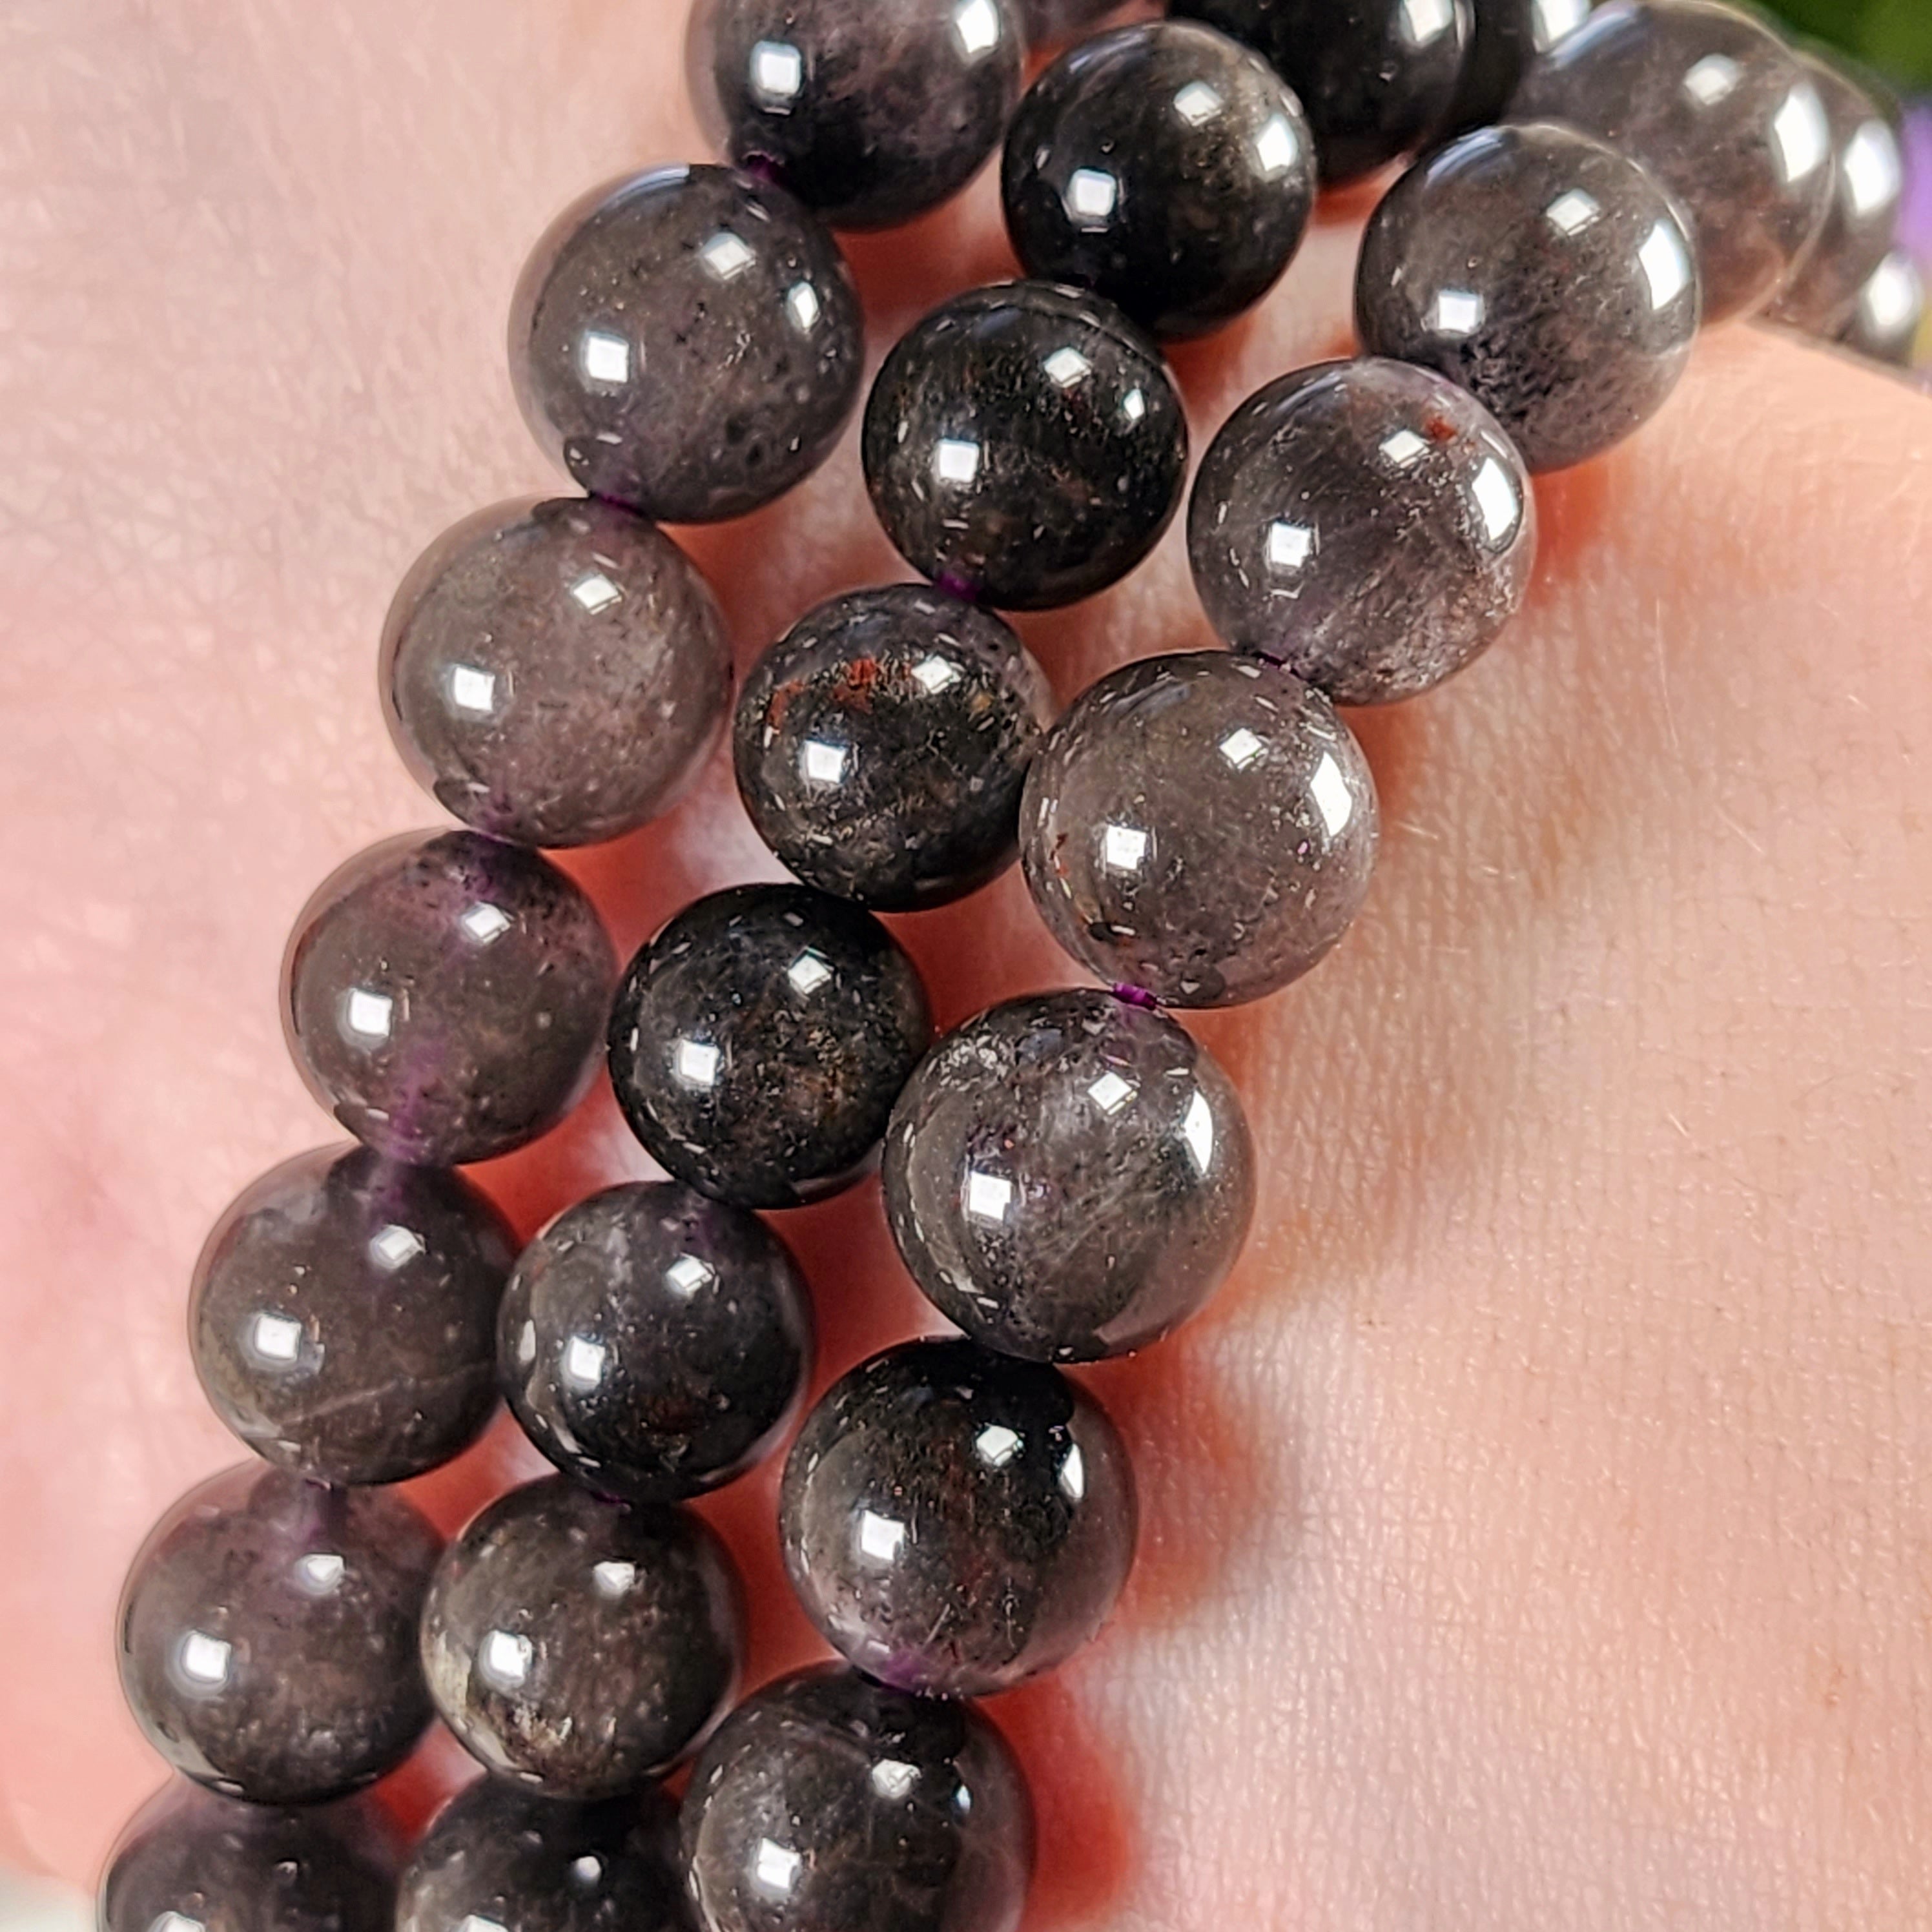 Auralite 23 with Silver Rutile Bracelet (High Quality) for Emotional and Physical Healing